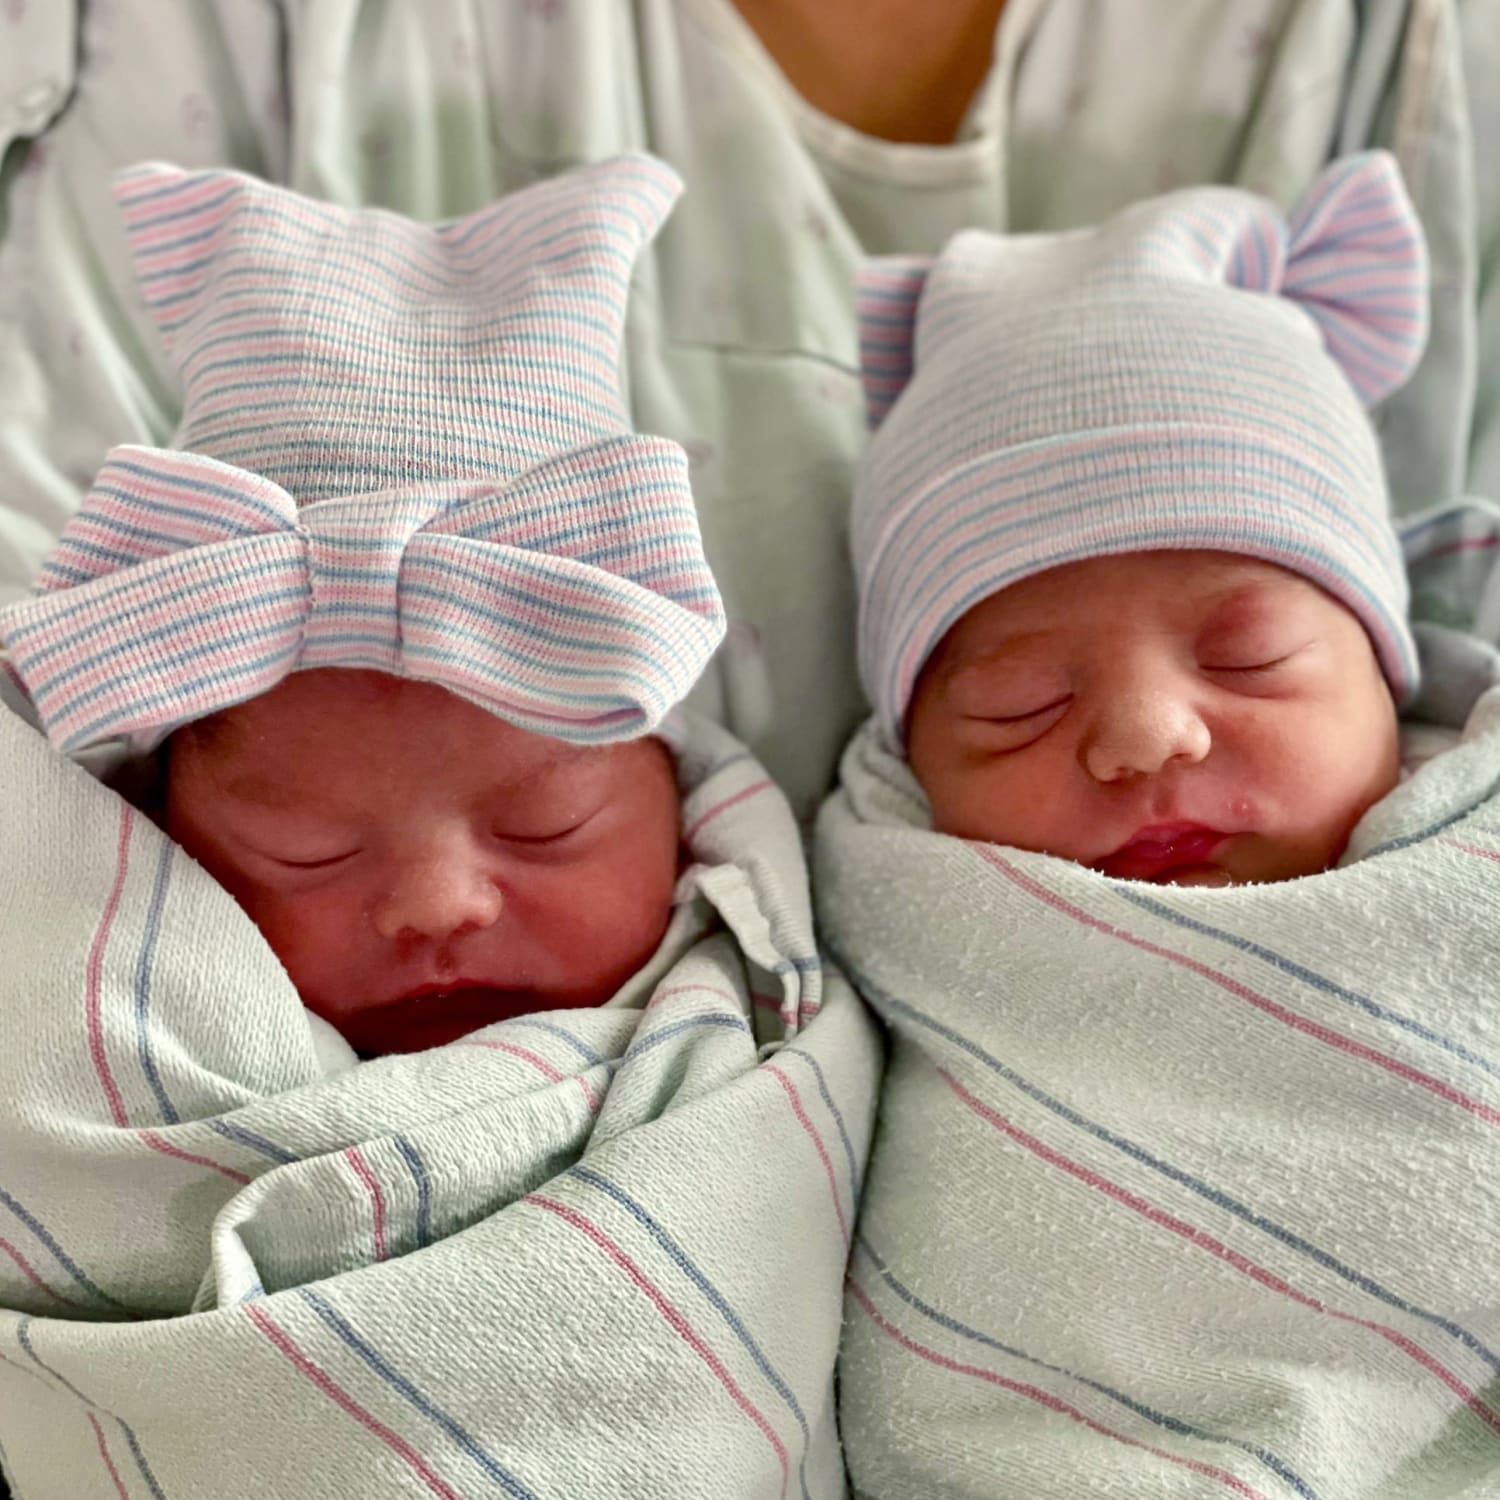 California twins, born 15 minutes apart, arrive in different years